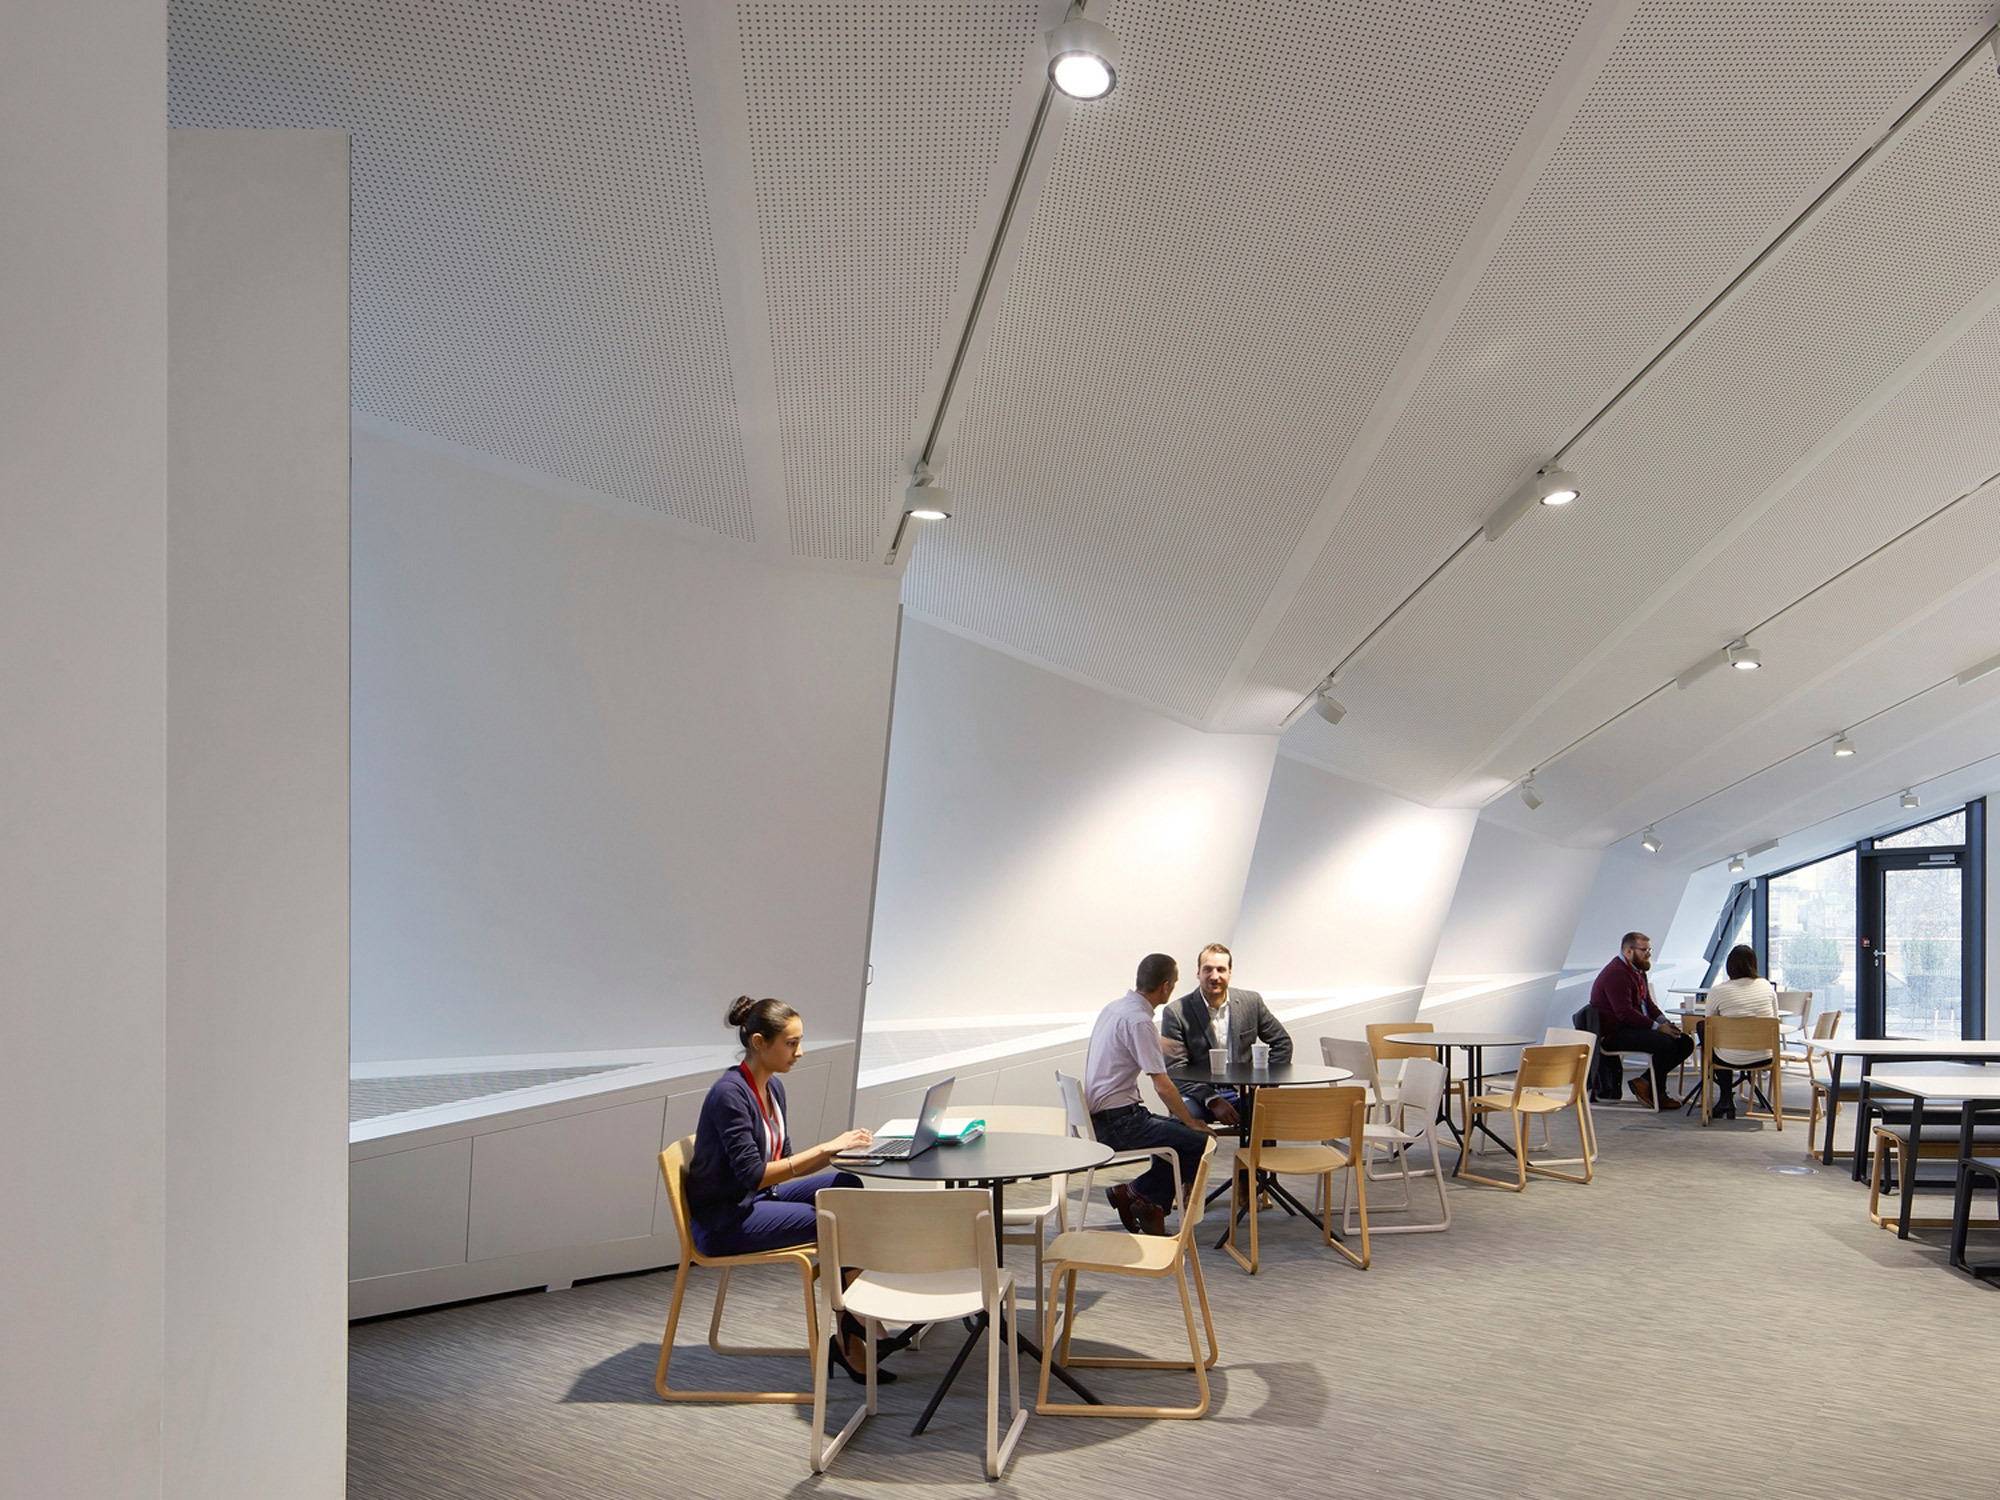 Modern office space with slanted ceilings and abundant natural light. Minimalist design features clean lines, white surfaces, and strategic lighting. Individual workstations and communal tables facilitate both focus and collaboration.